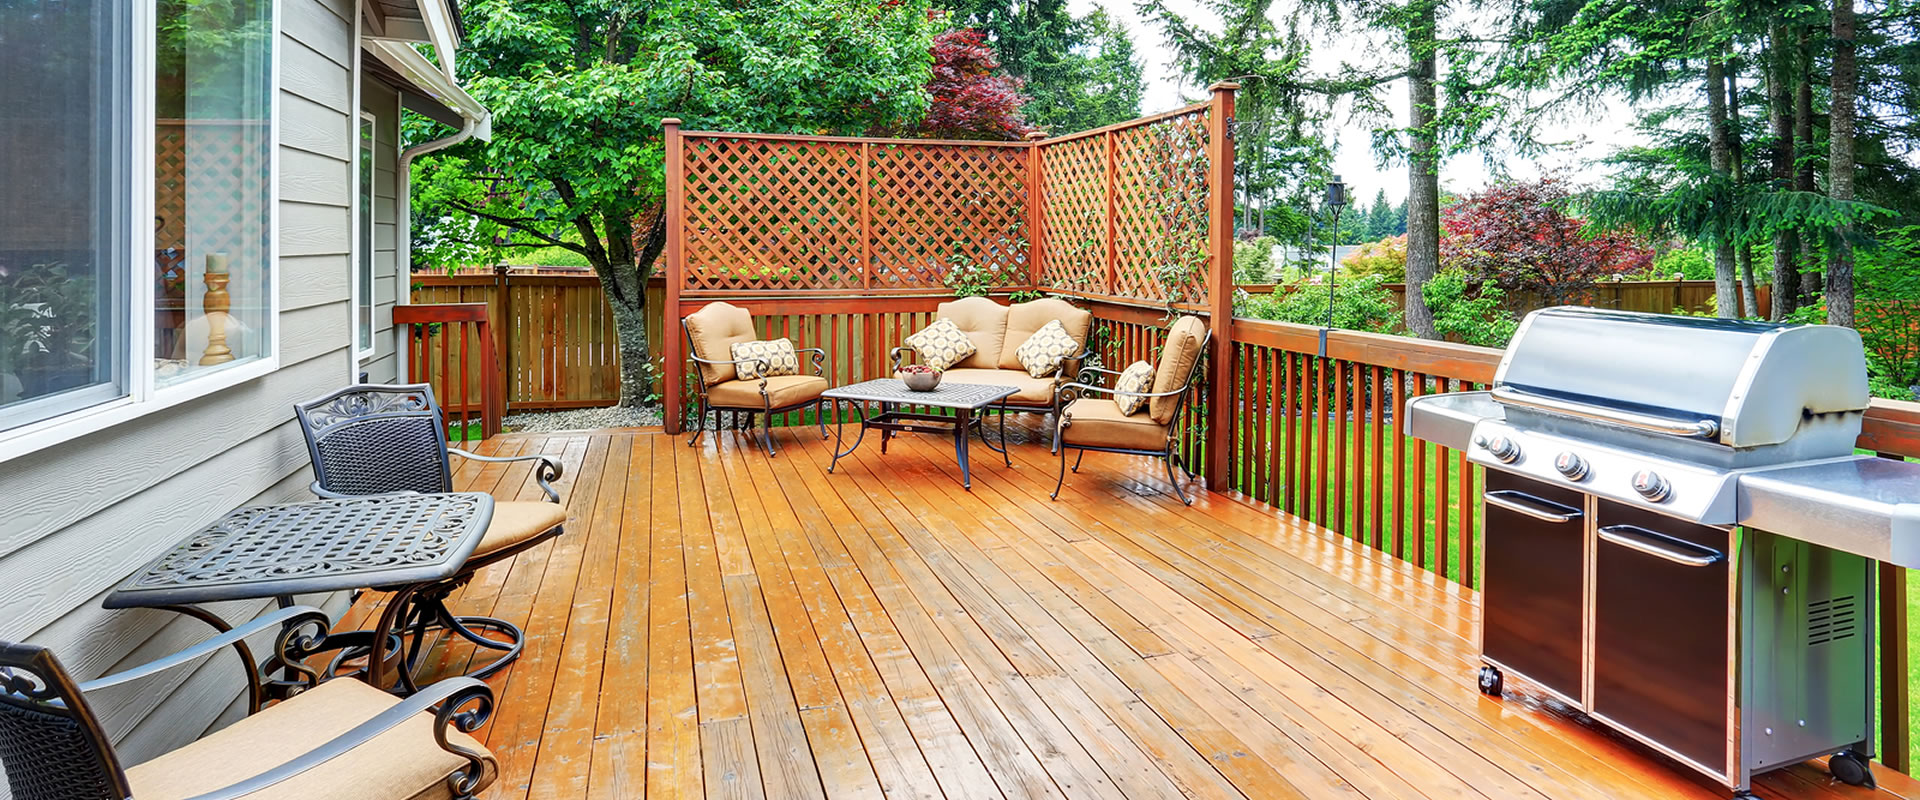 Deck Repair in Cranberry Township